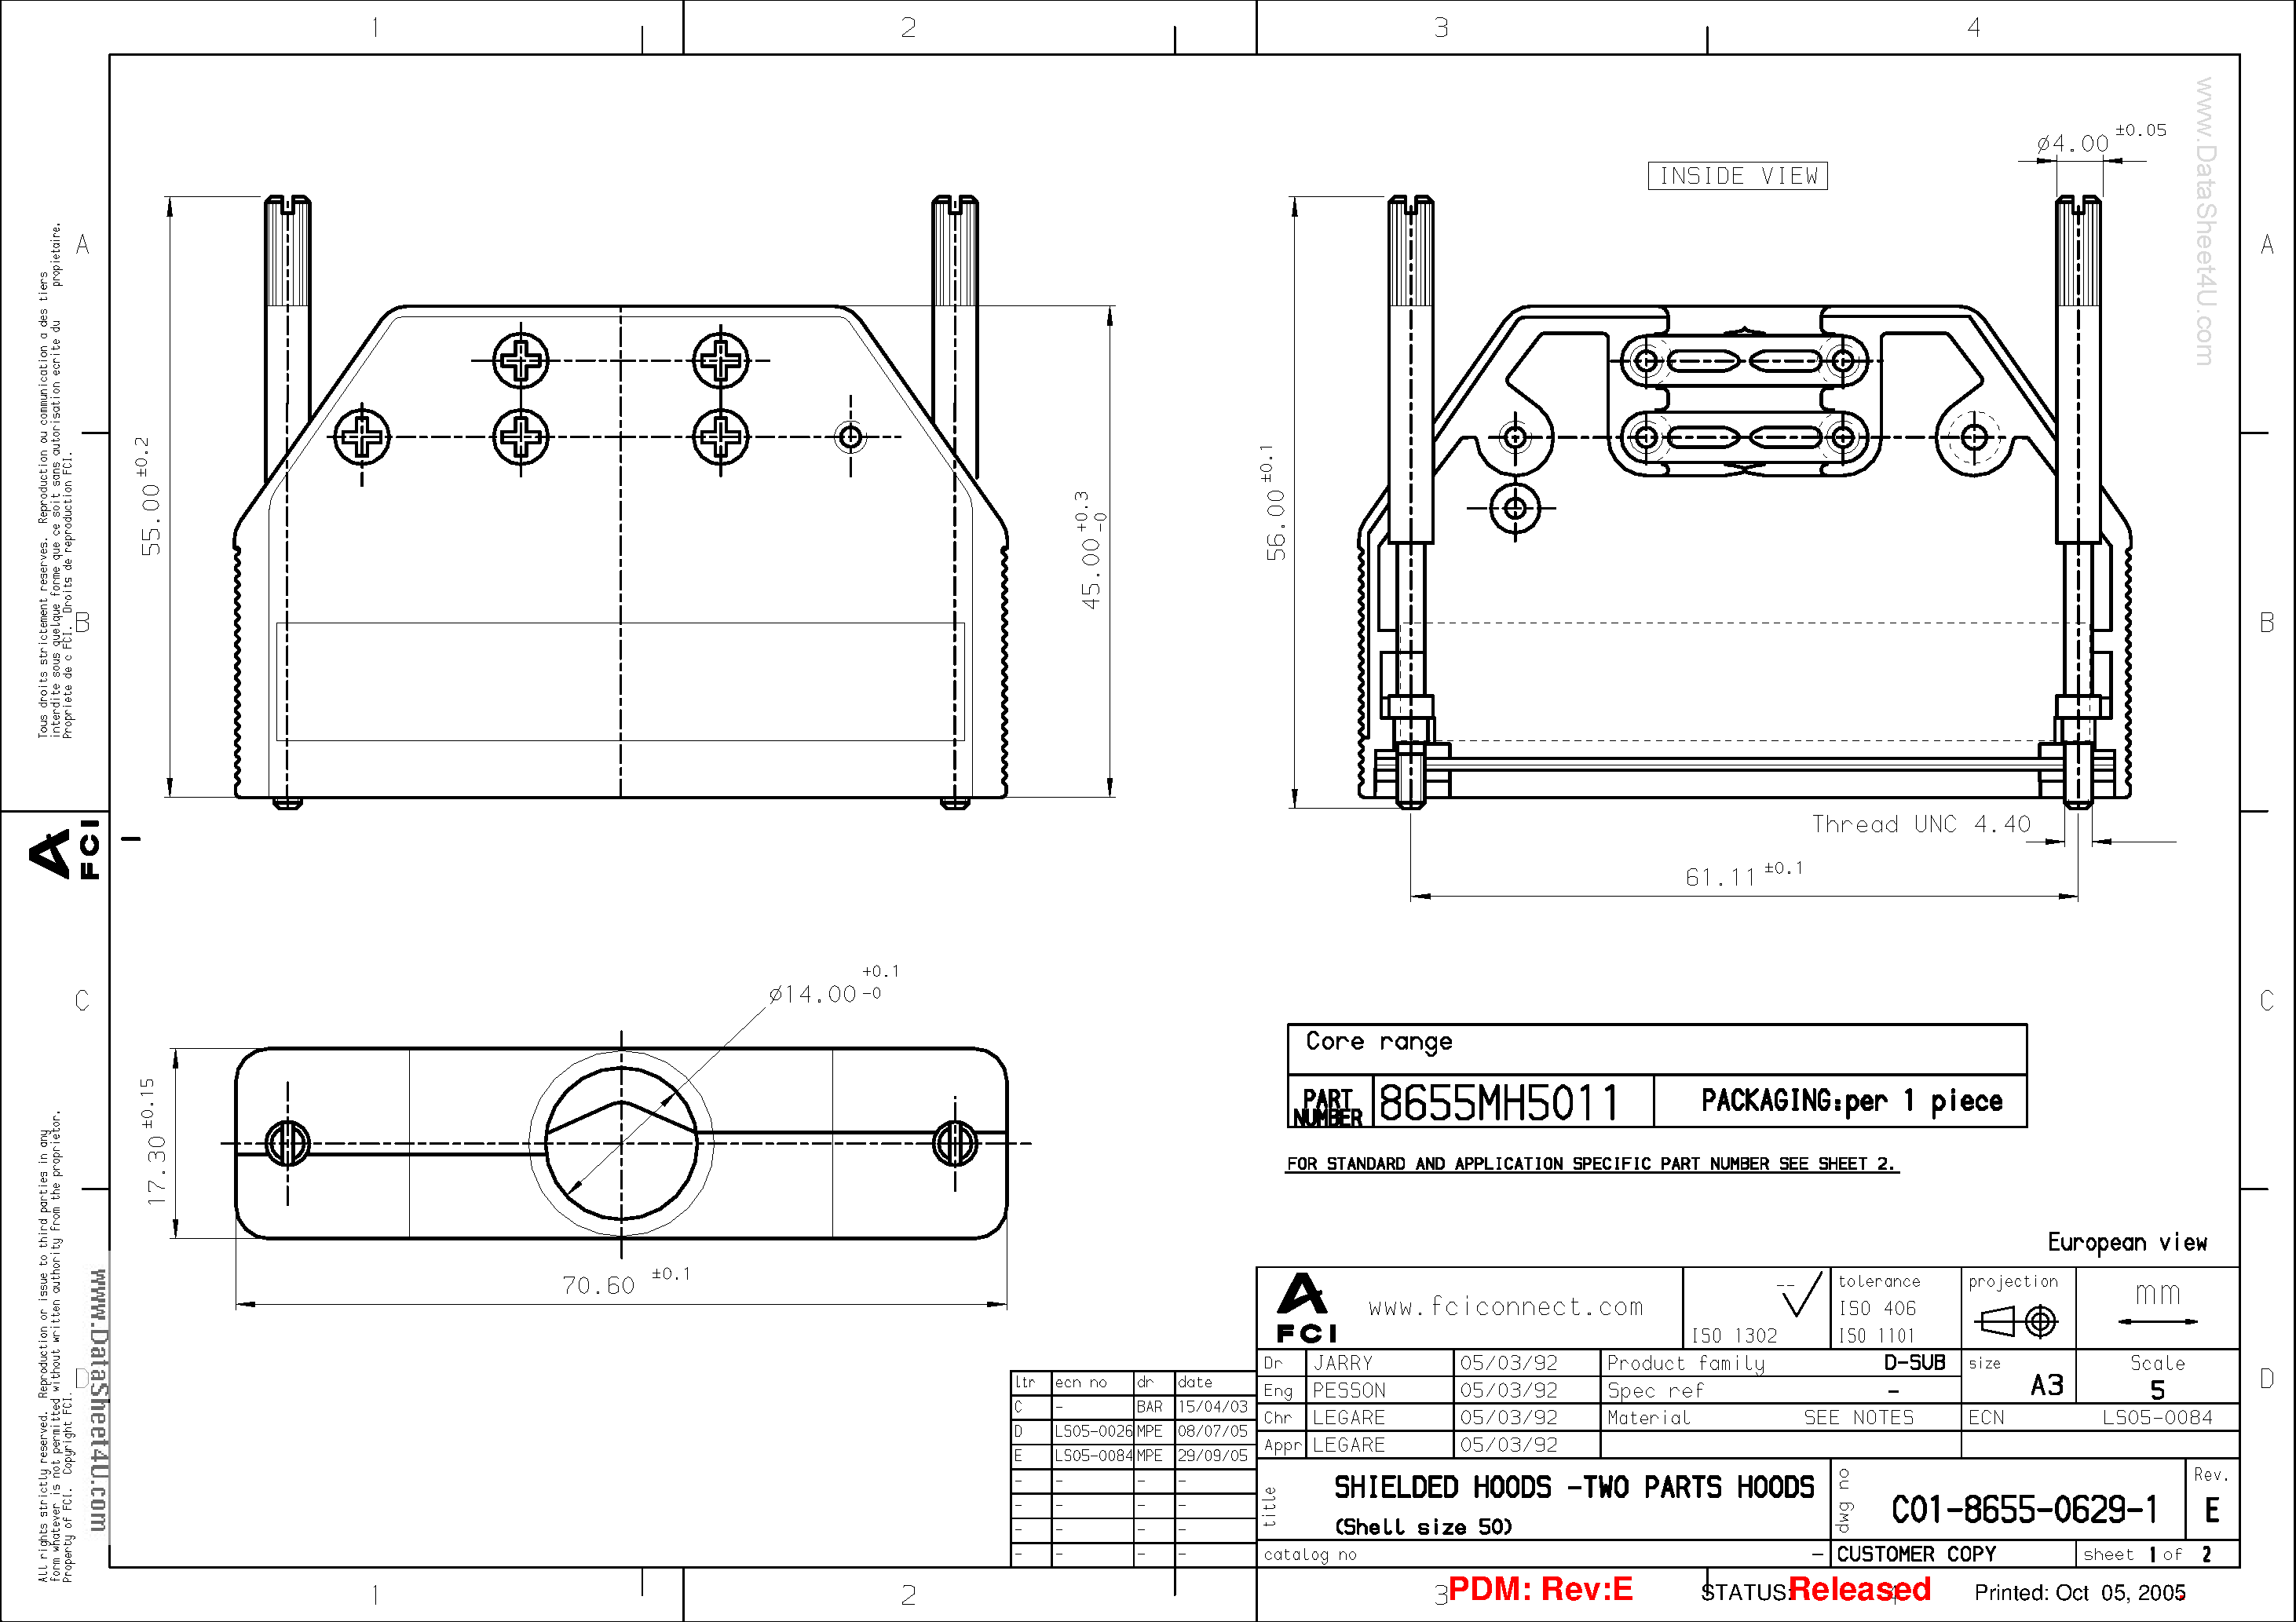 Datasheet 8655MH5001 - SHIELDED HOOD5 - TWO PARTS HOODS page 1